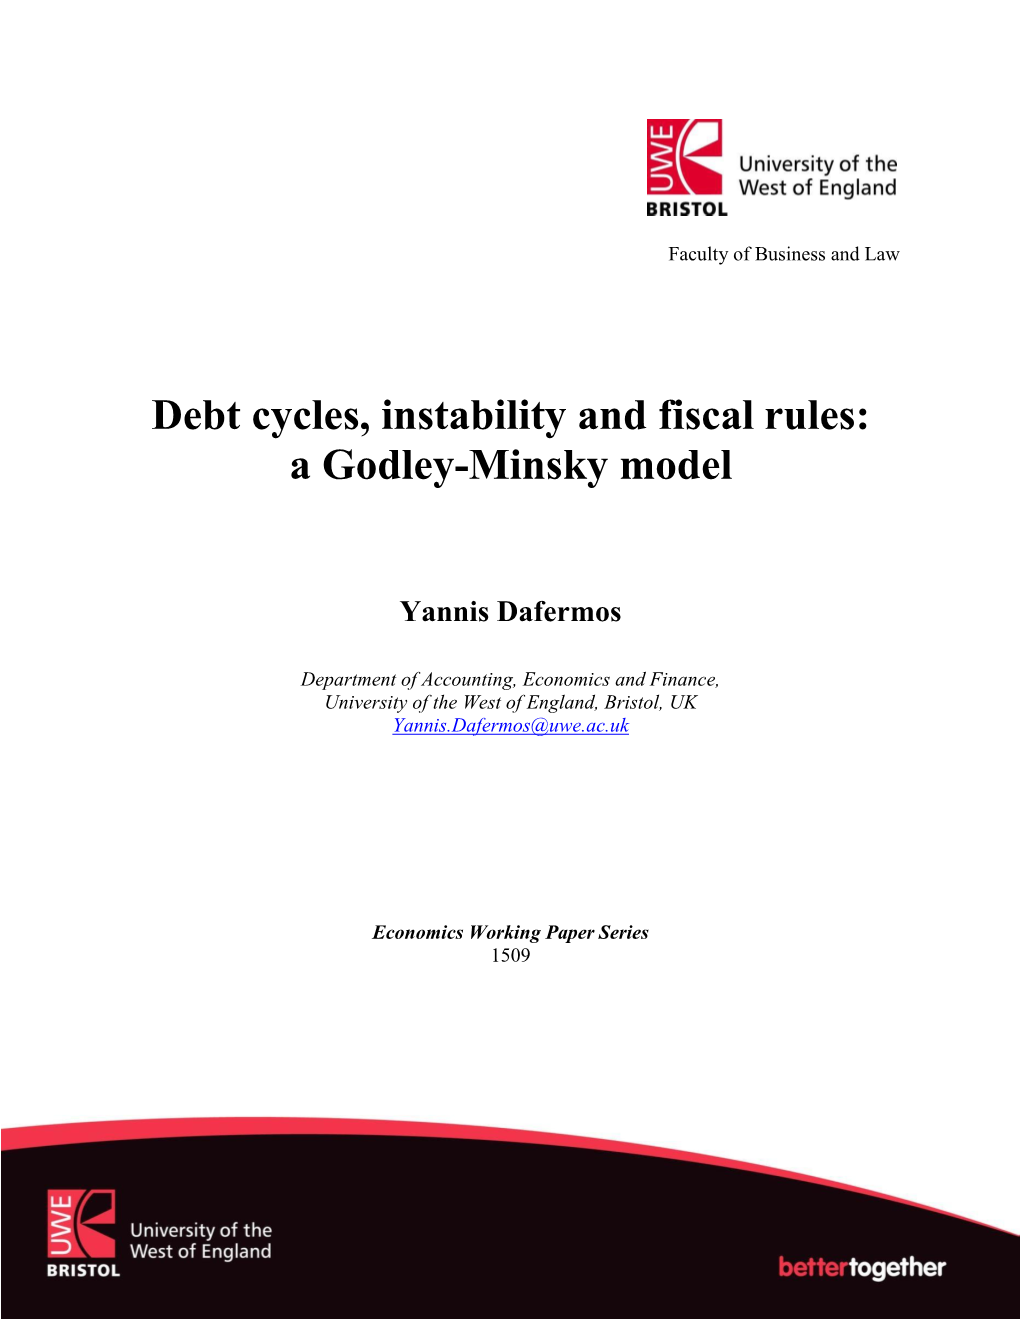 Debt Cycles, Instability and Fiscal Rules: a Godley-Minsky Model